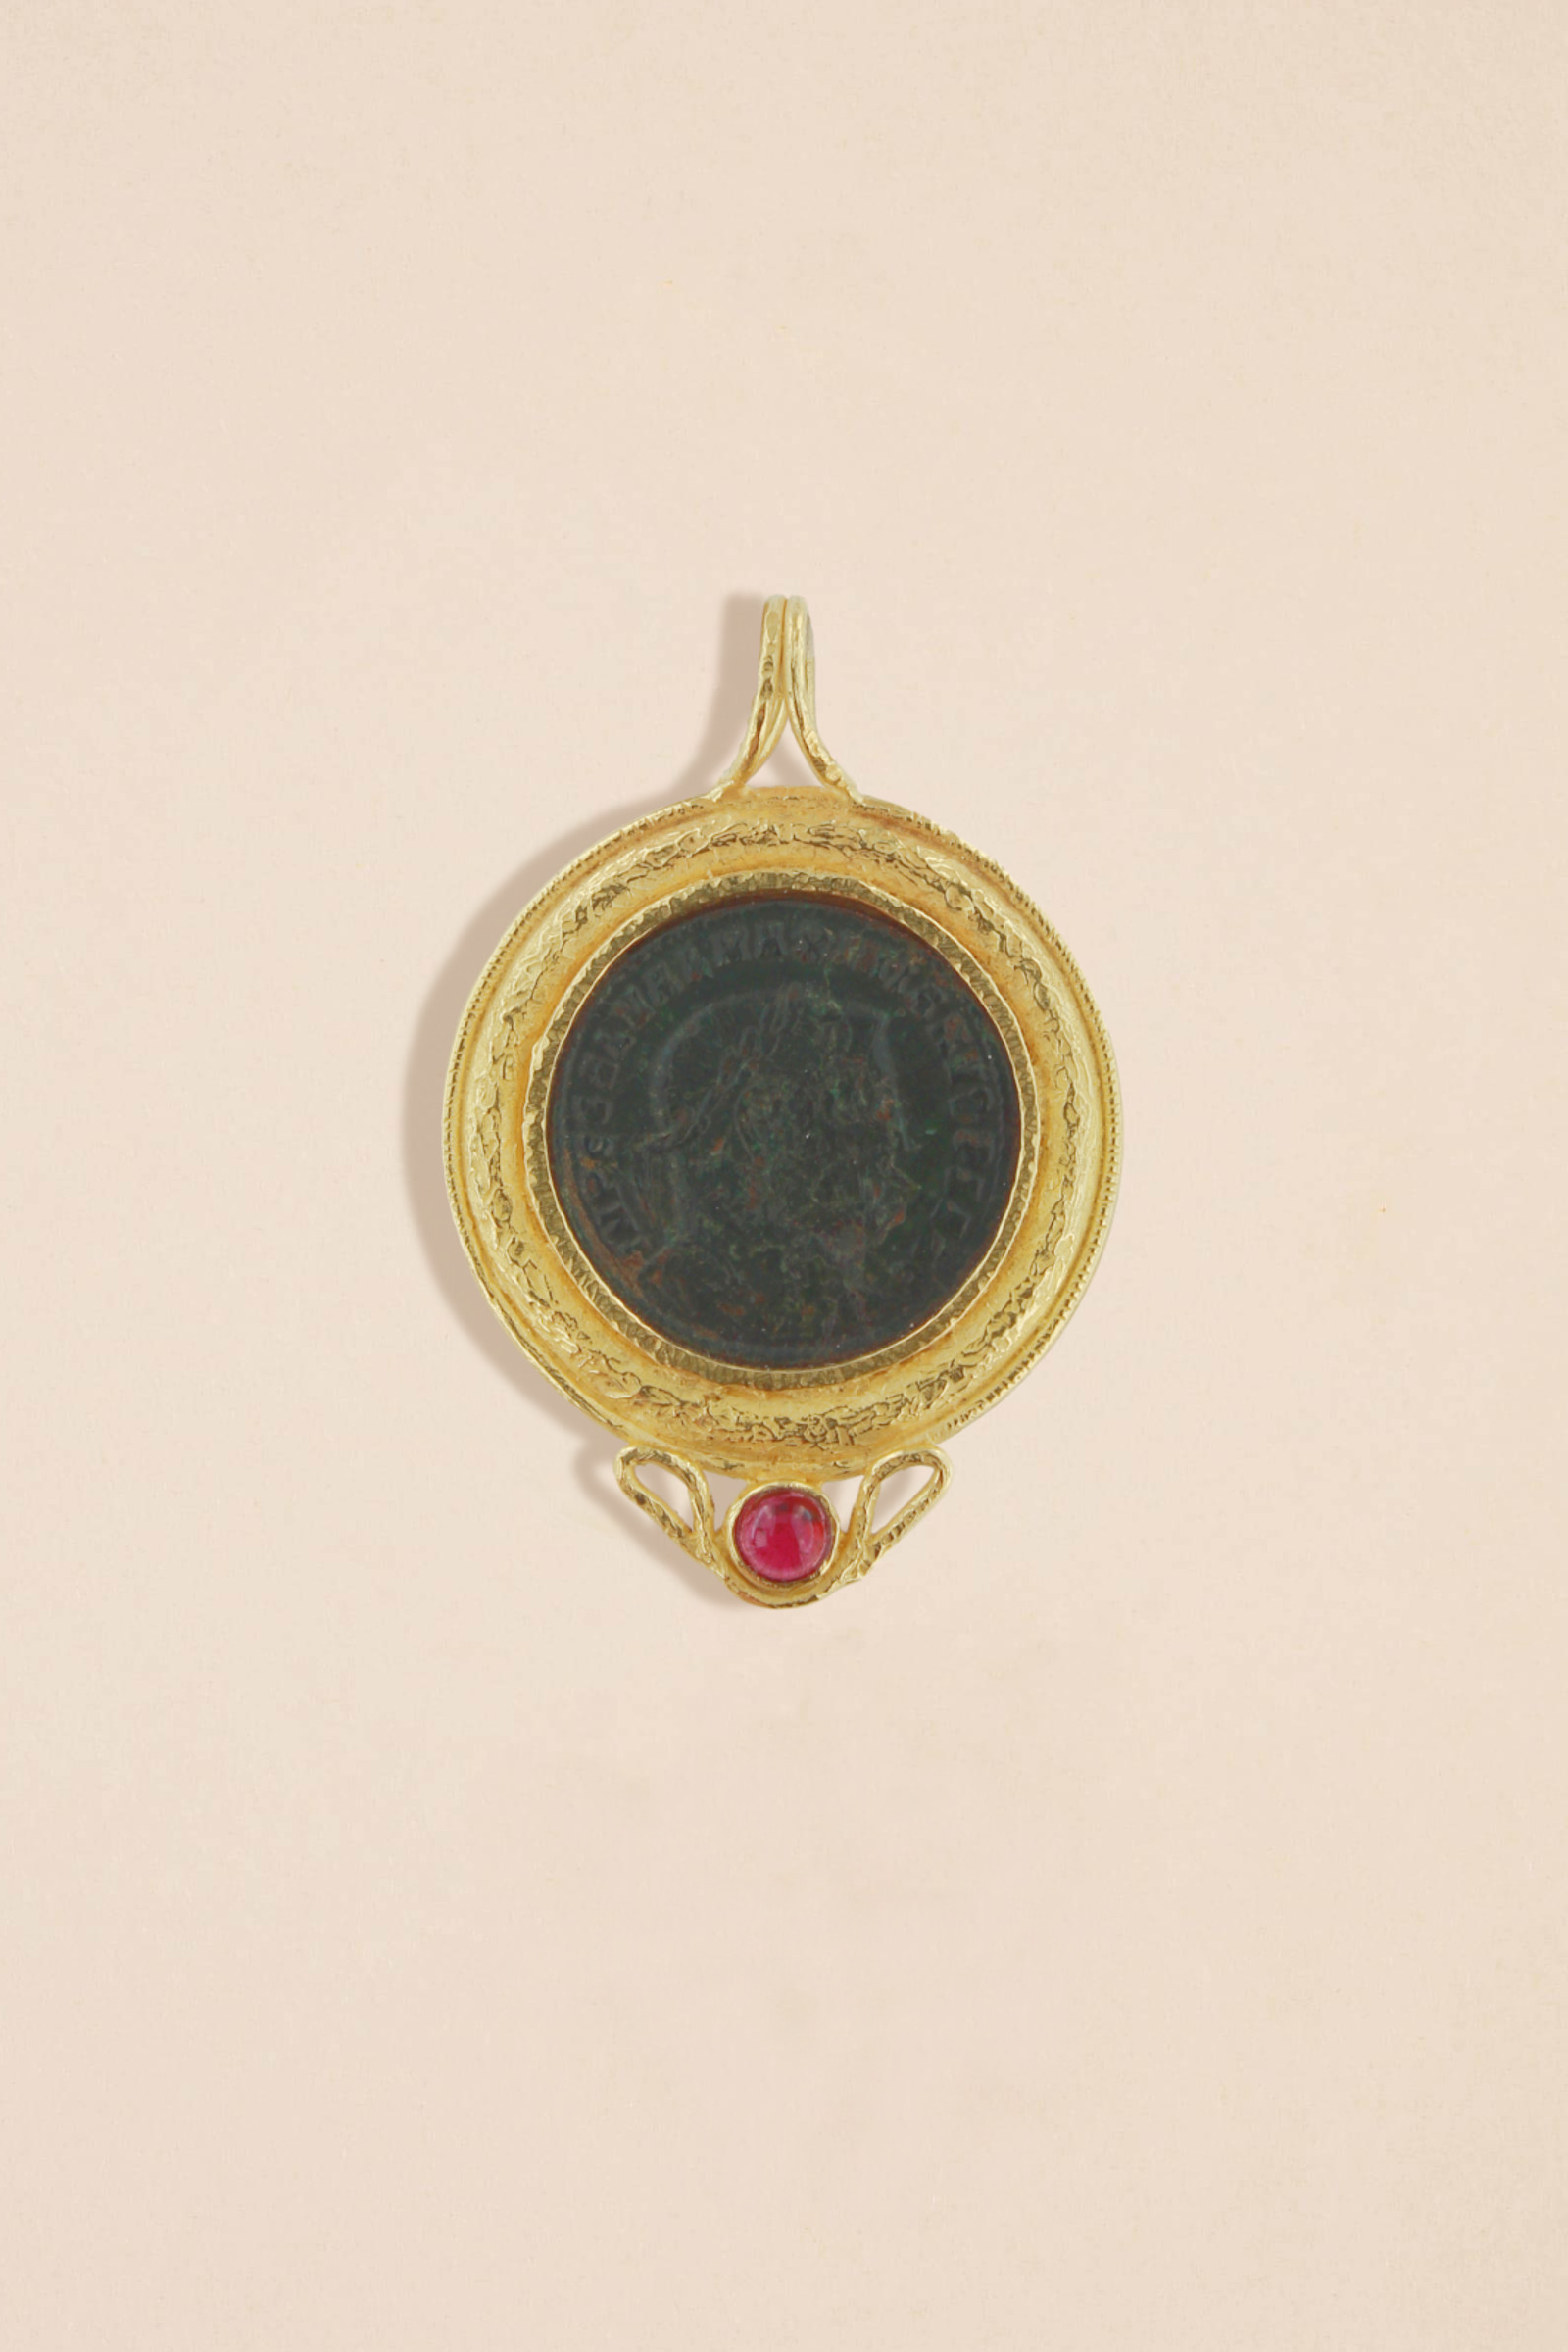 SH611B-18-Kt-Yellow-Gold-Pendant-with-Roman-Coin-and-Granet-Cabochon-1